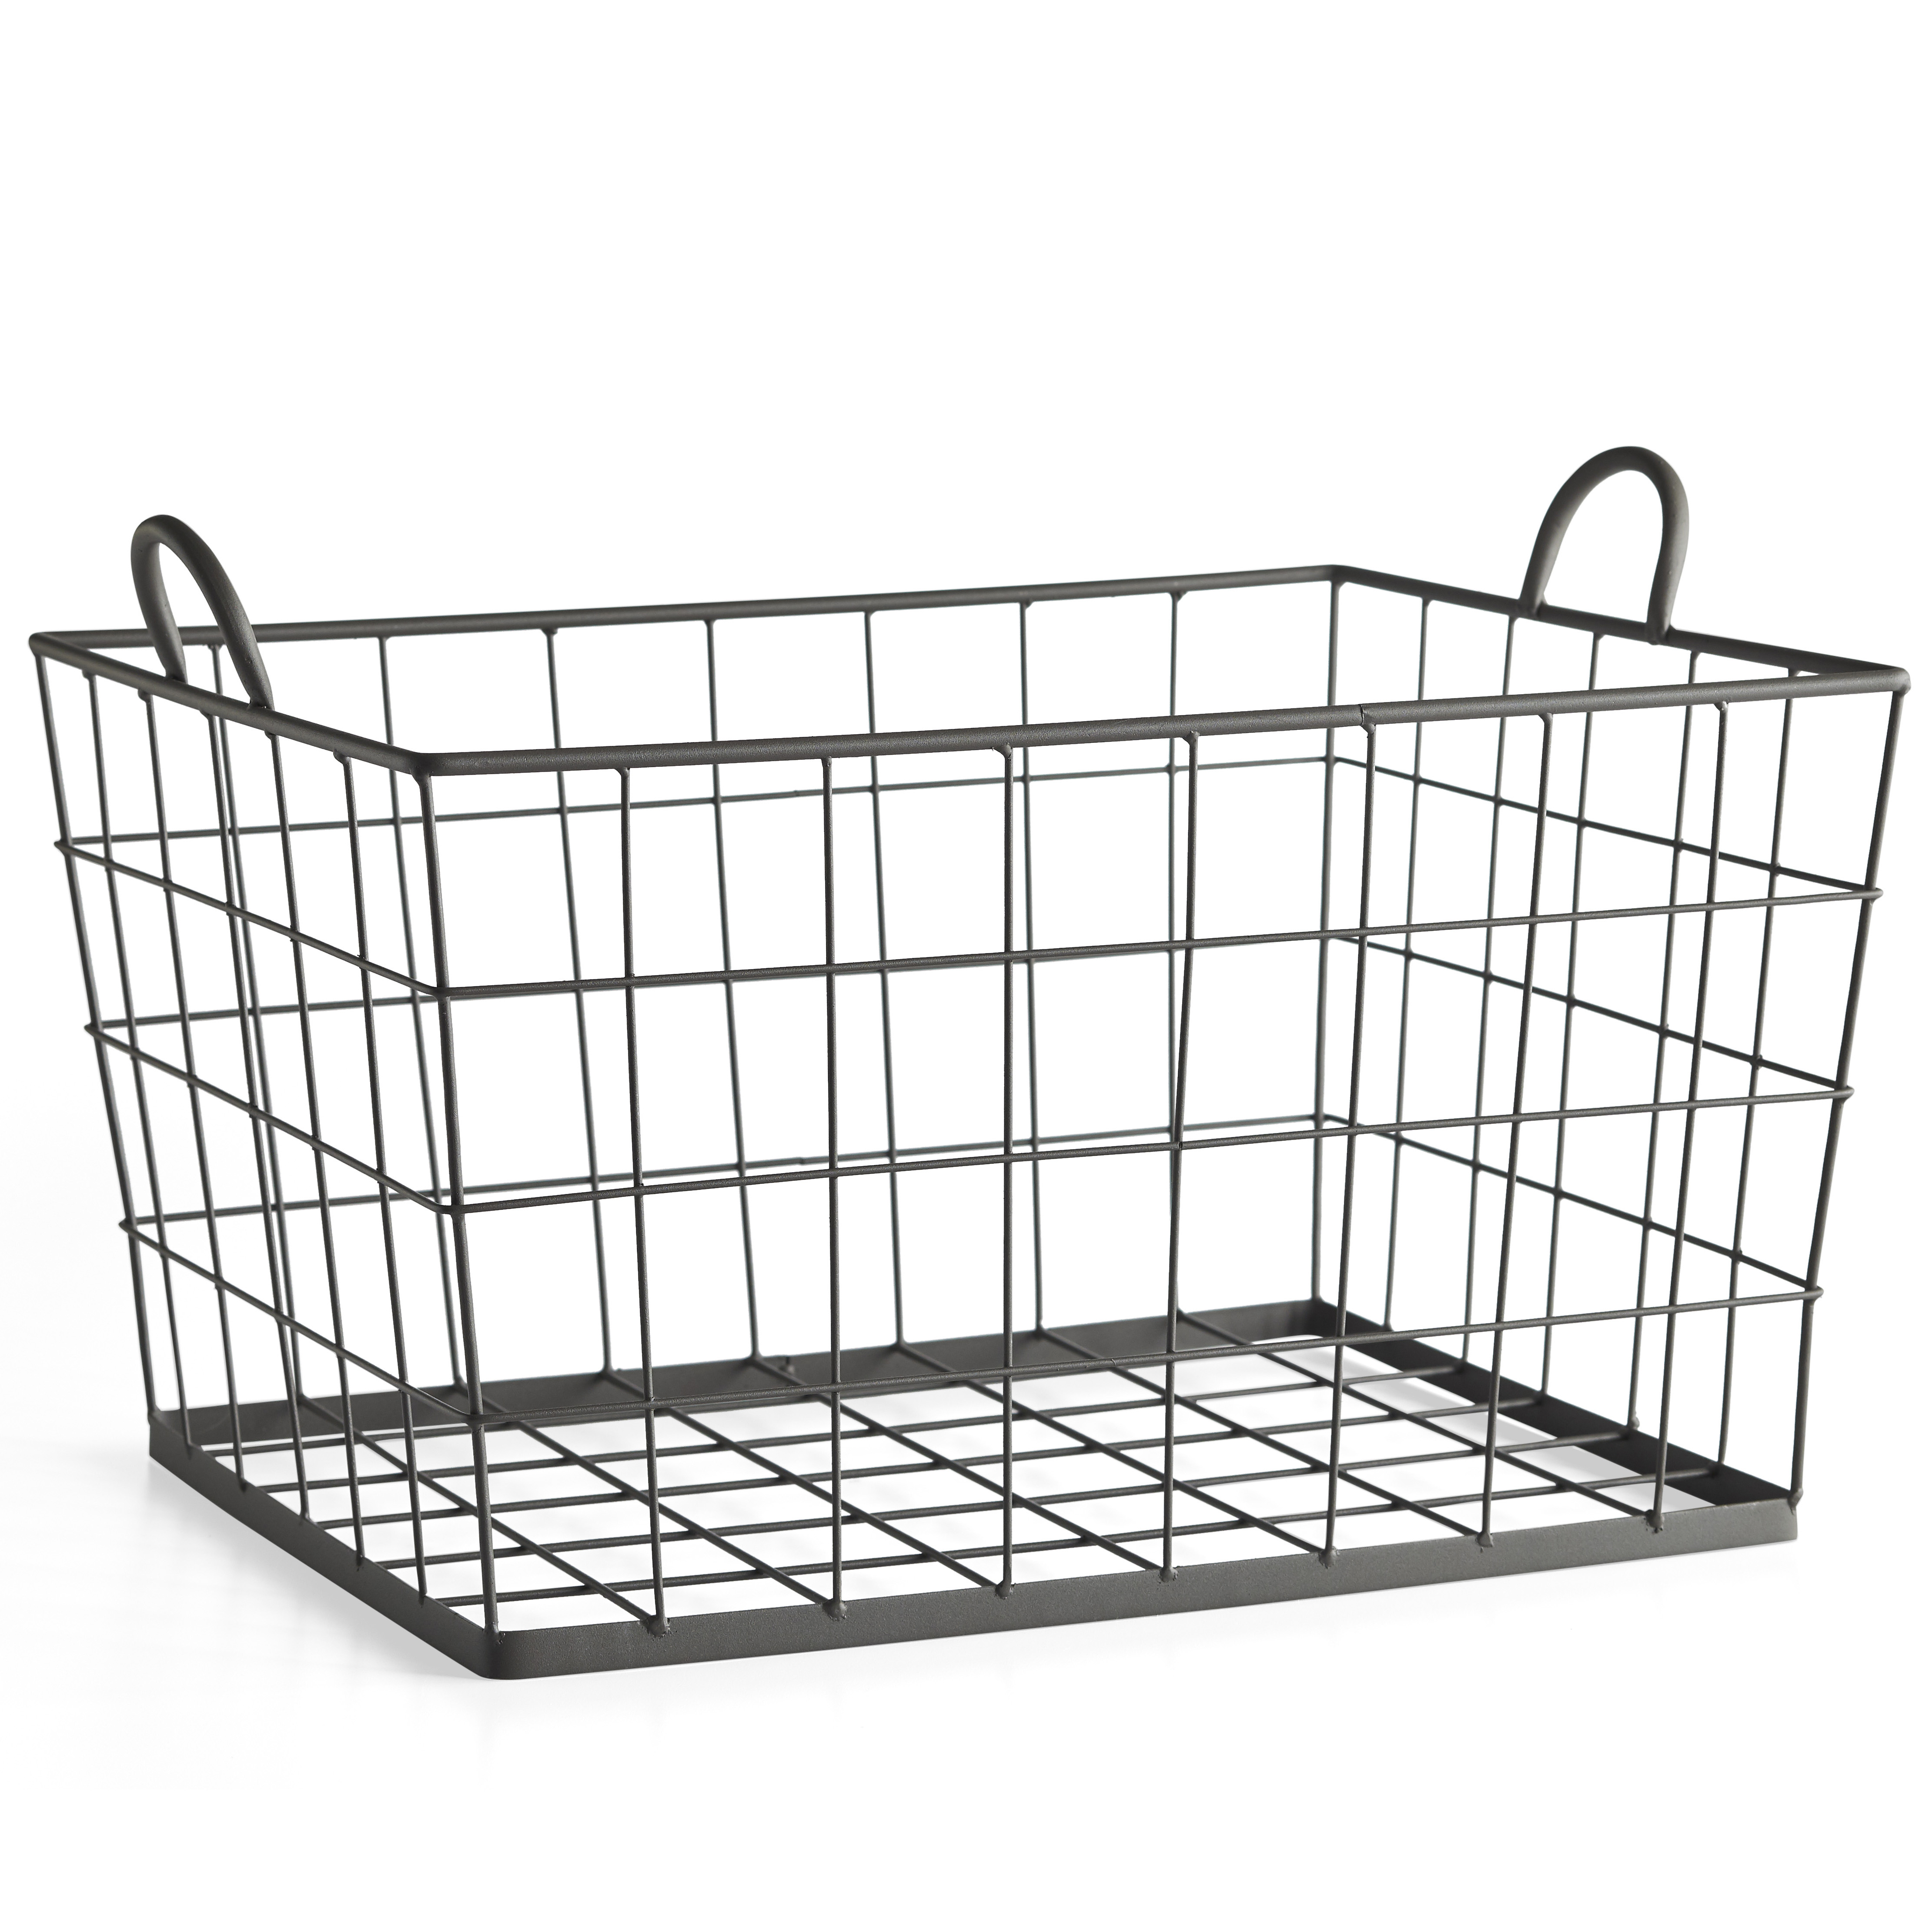 Better Homes & Gardens Heavy-Gauge Wire Laundry Basket, Antique Gray for Adult Use - image 3 of 10